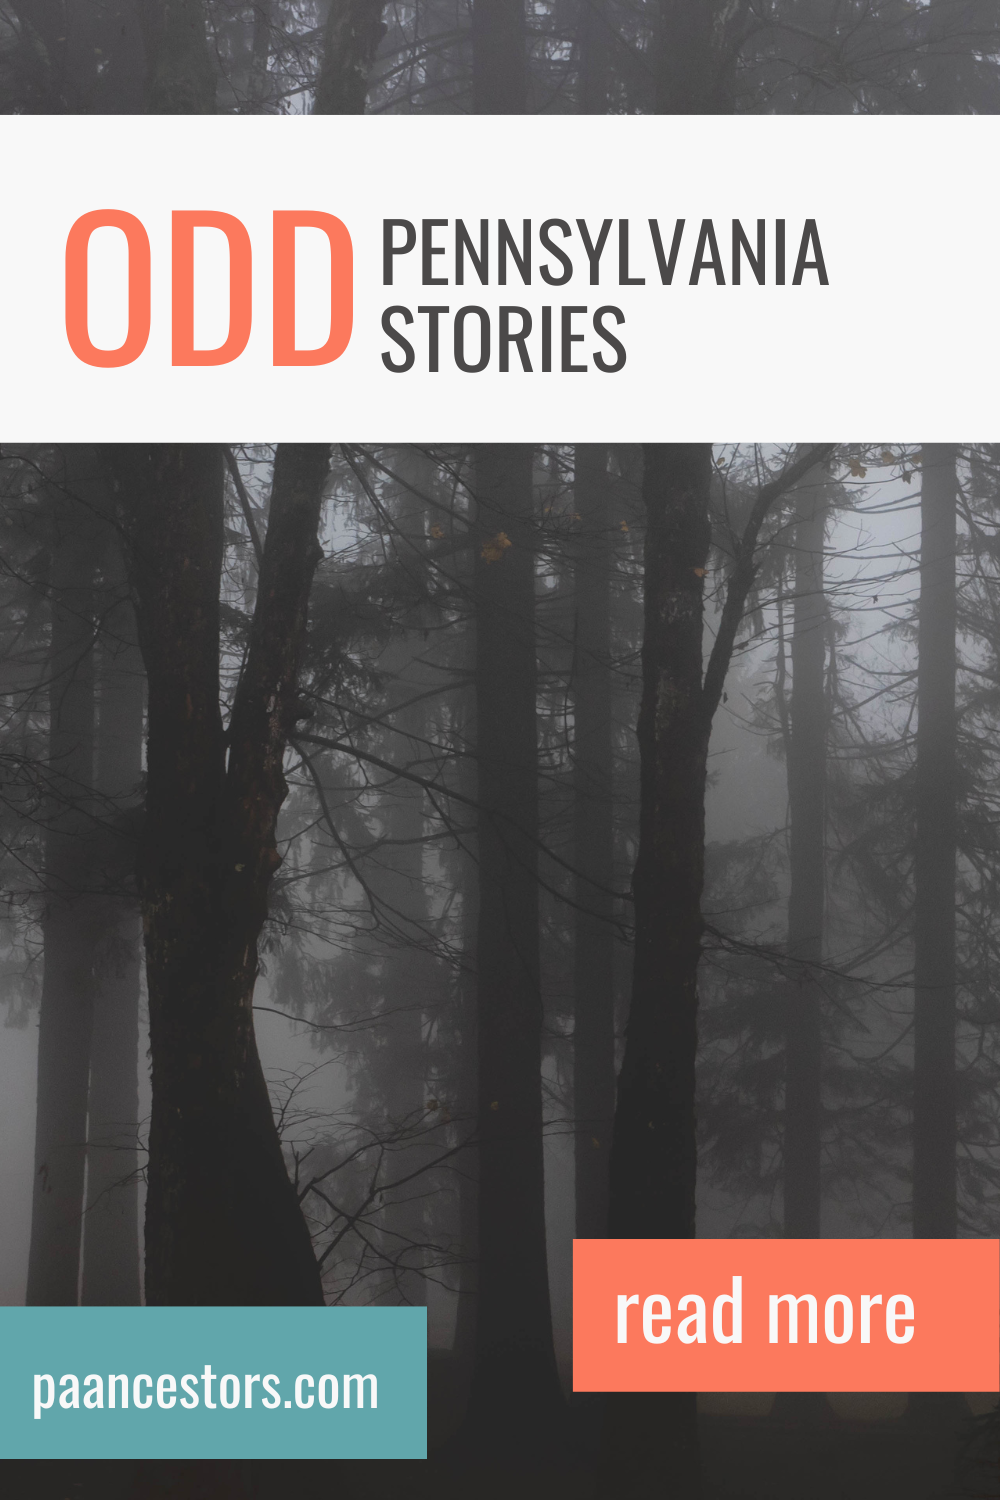 Odd Pennsylvania Events Your Ancestor Could Have Been In